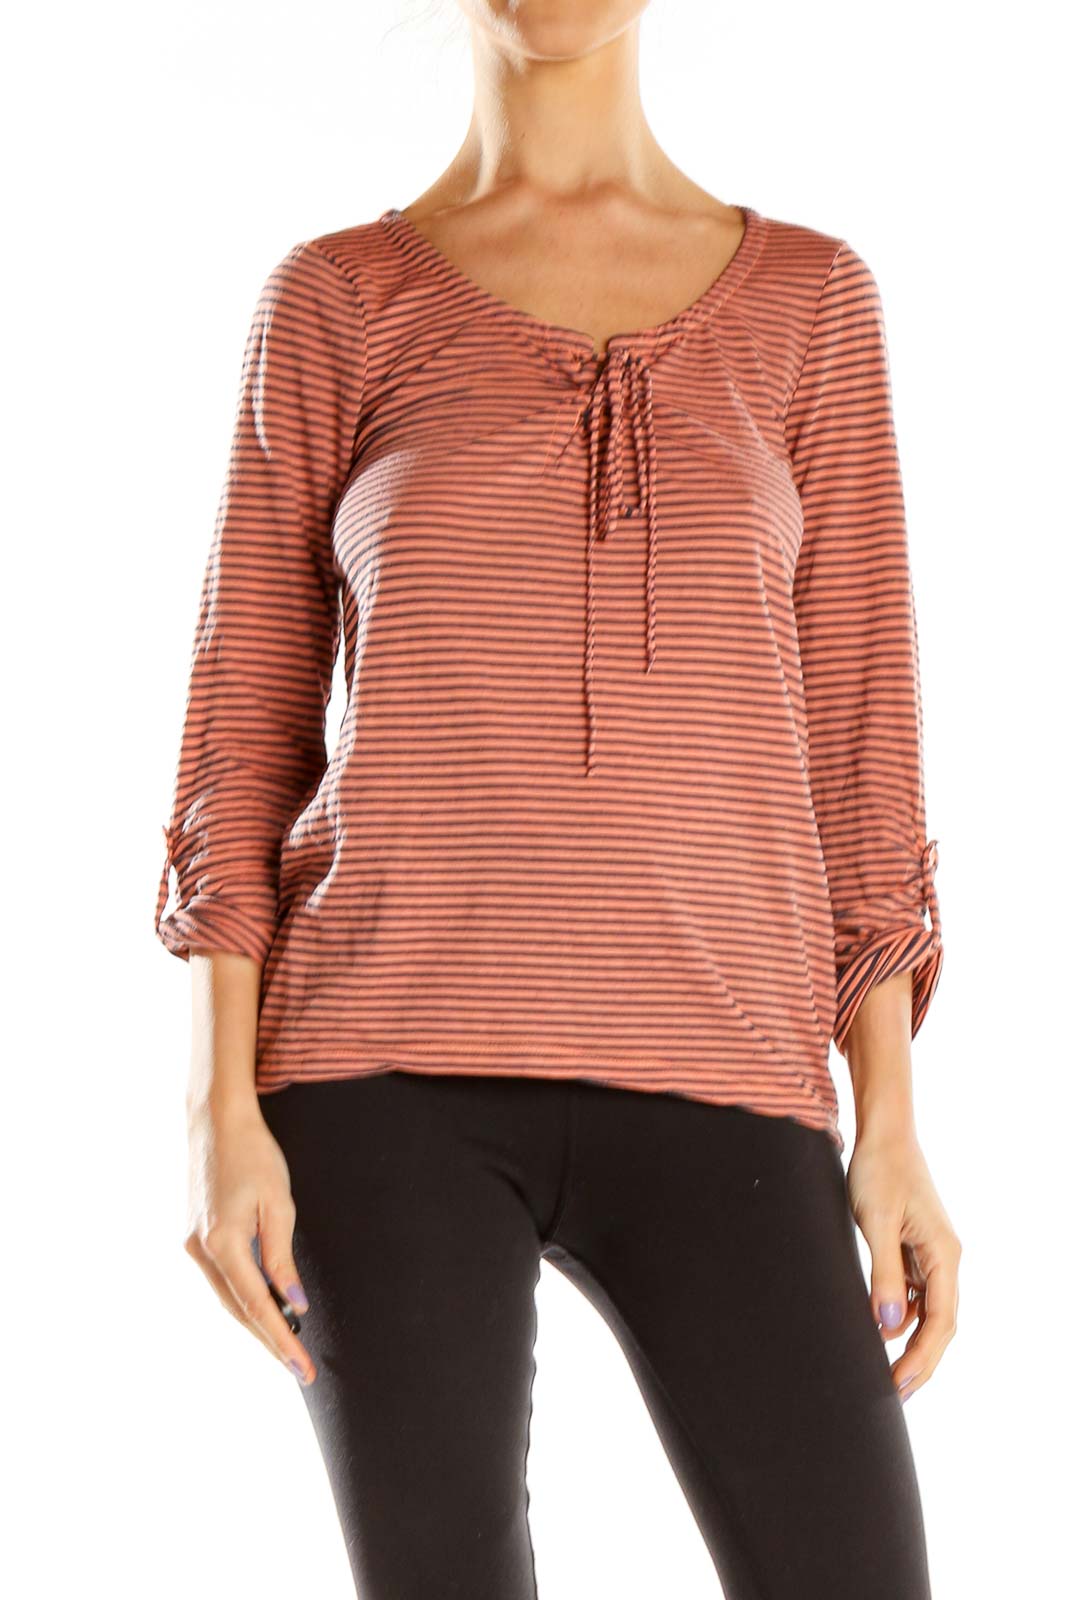 Orange Striped Casual Shirt Front